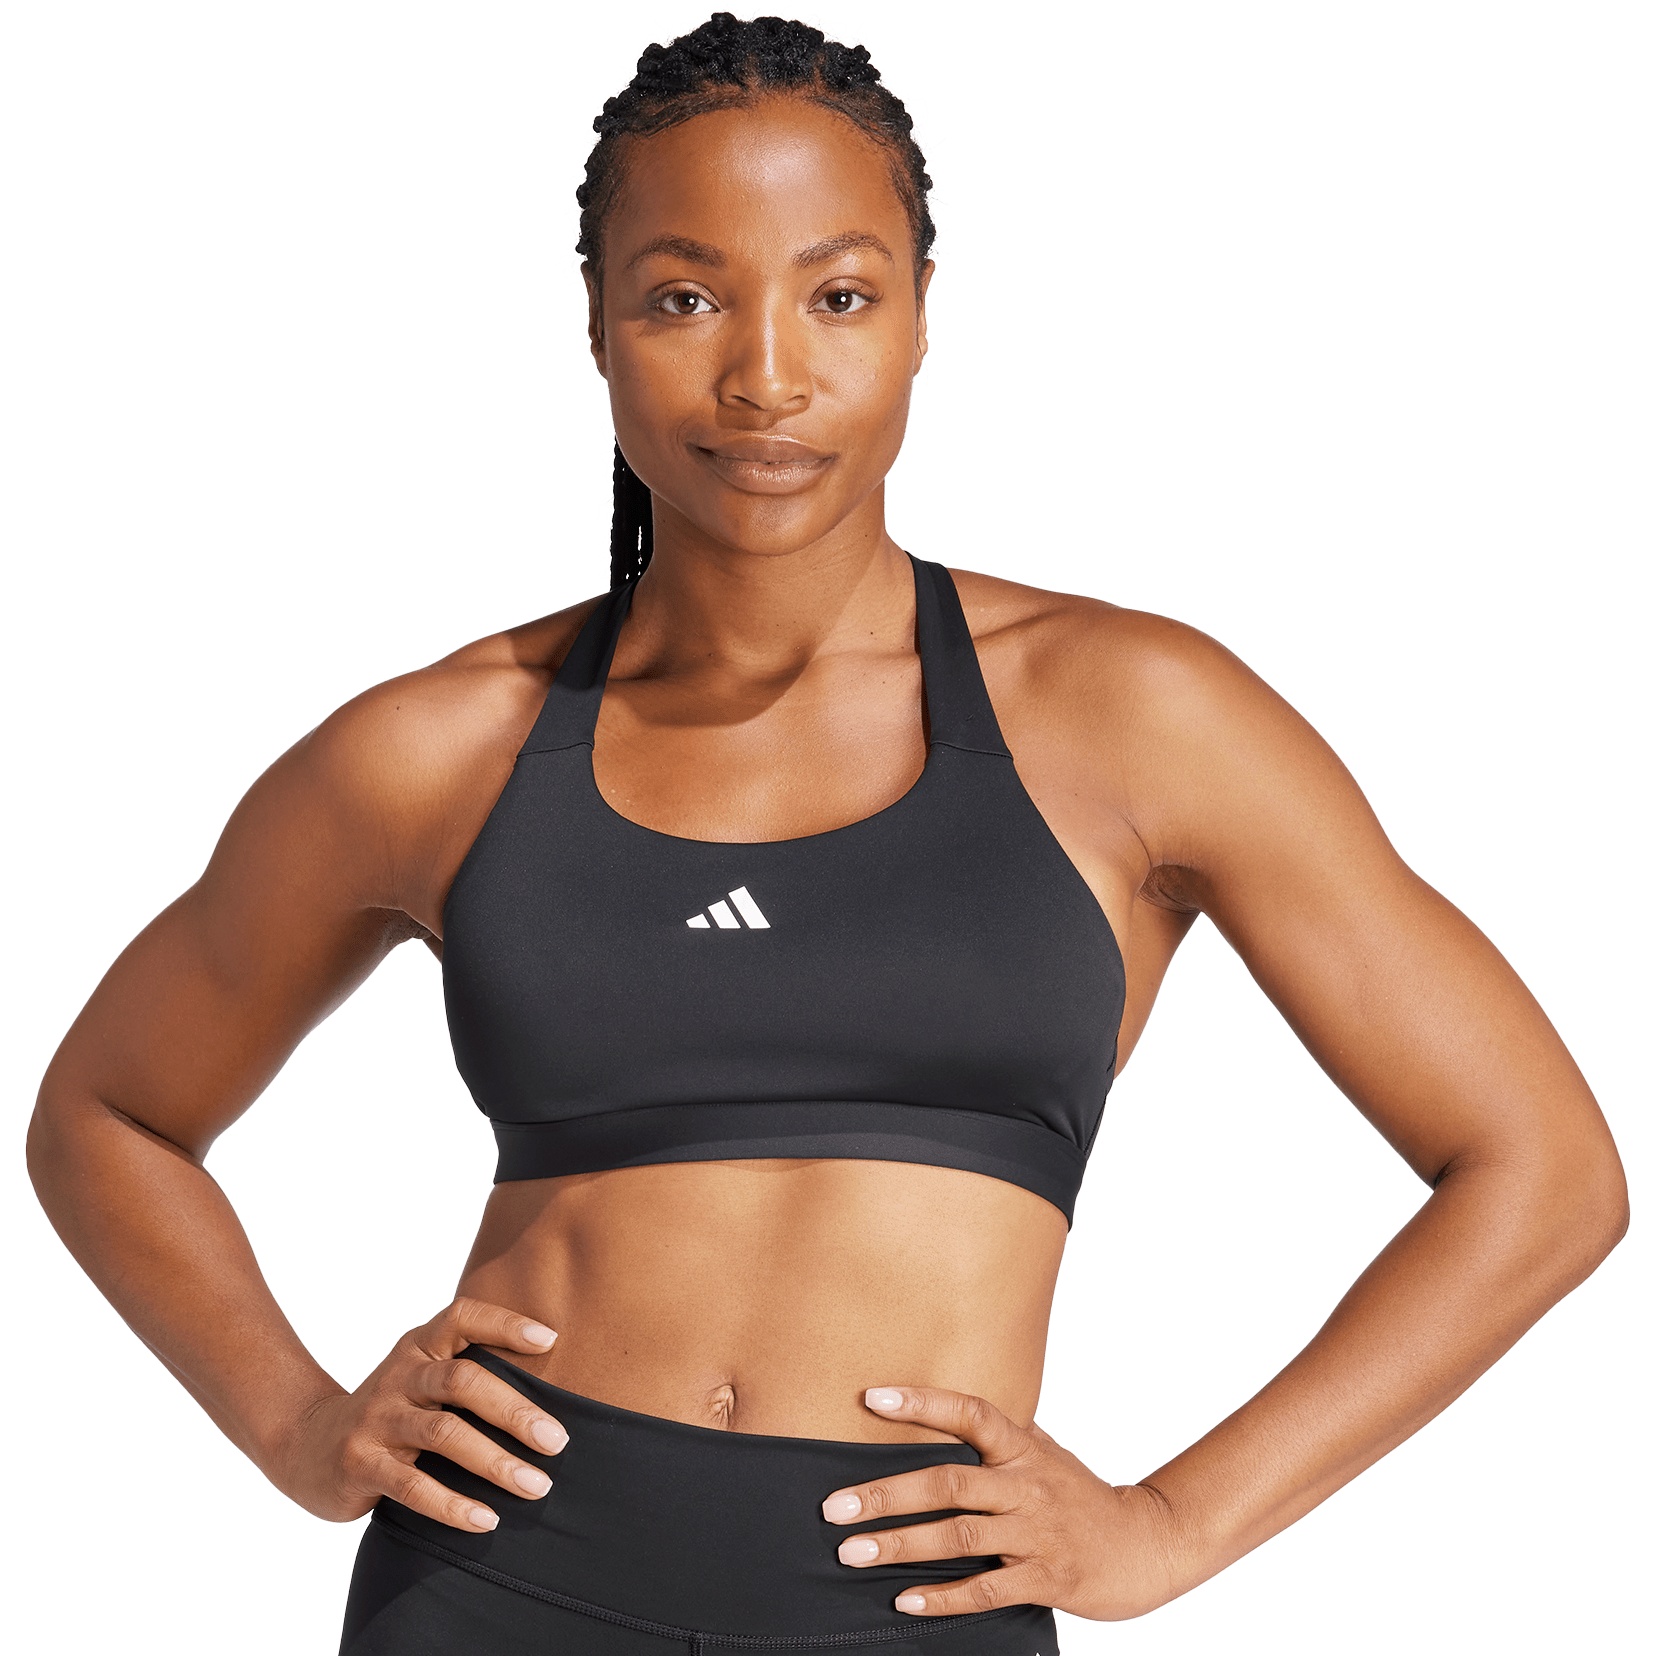 adidas TLRDREACT Training High-Support Sports Bra Women - Cup size